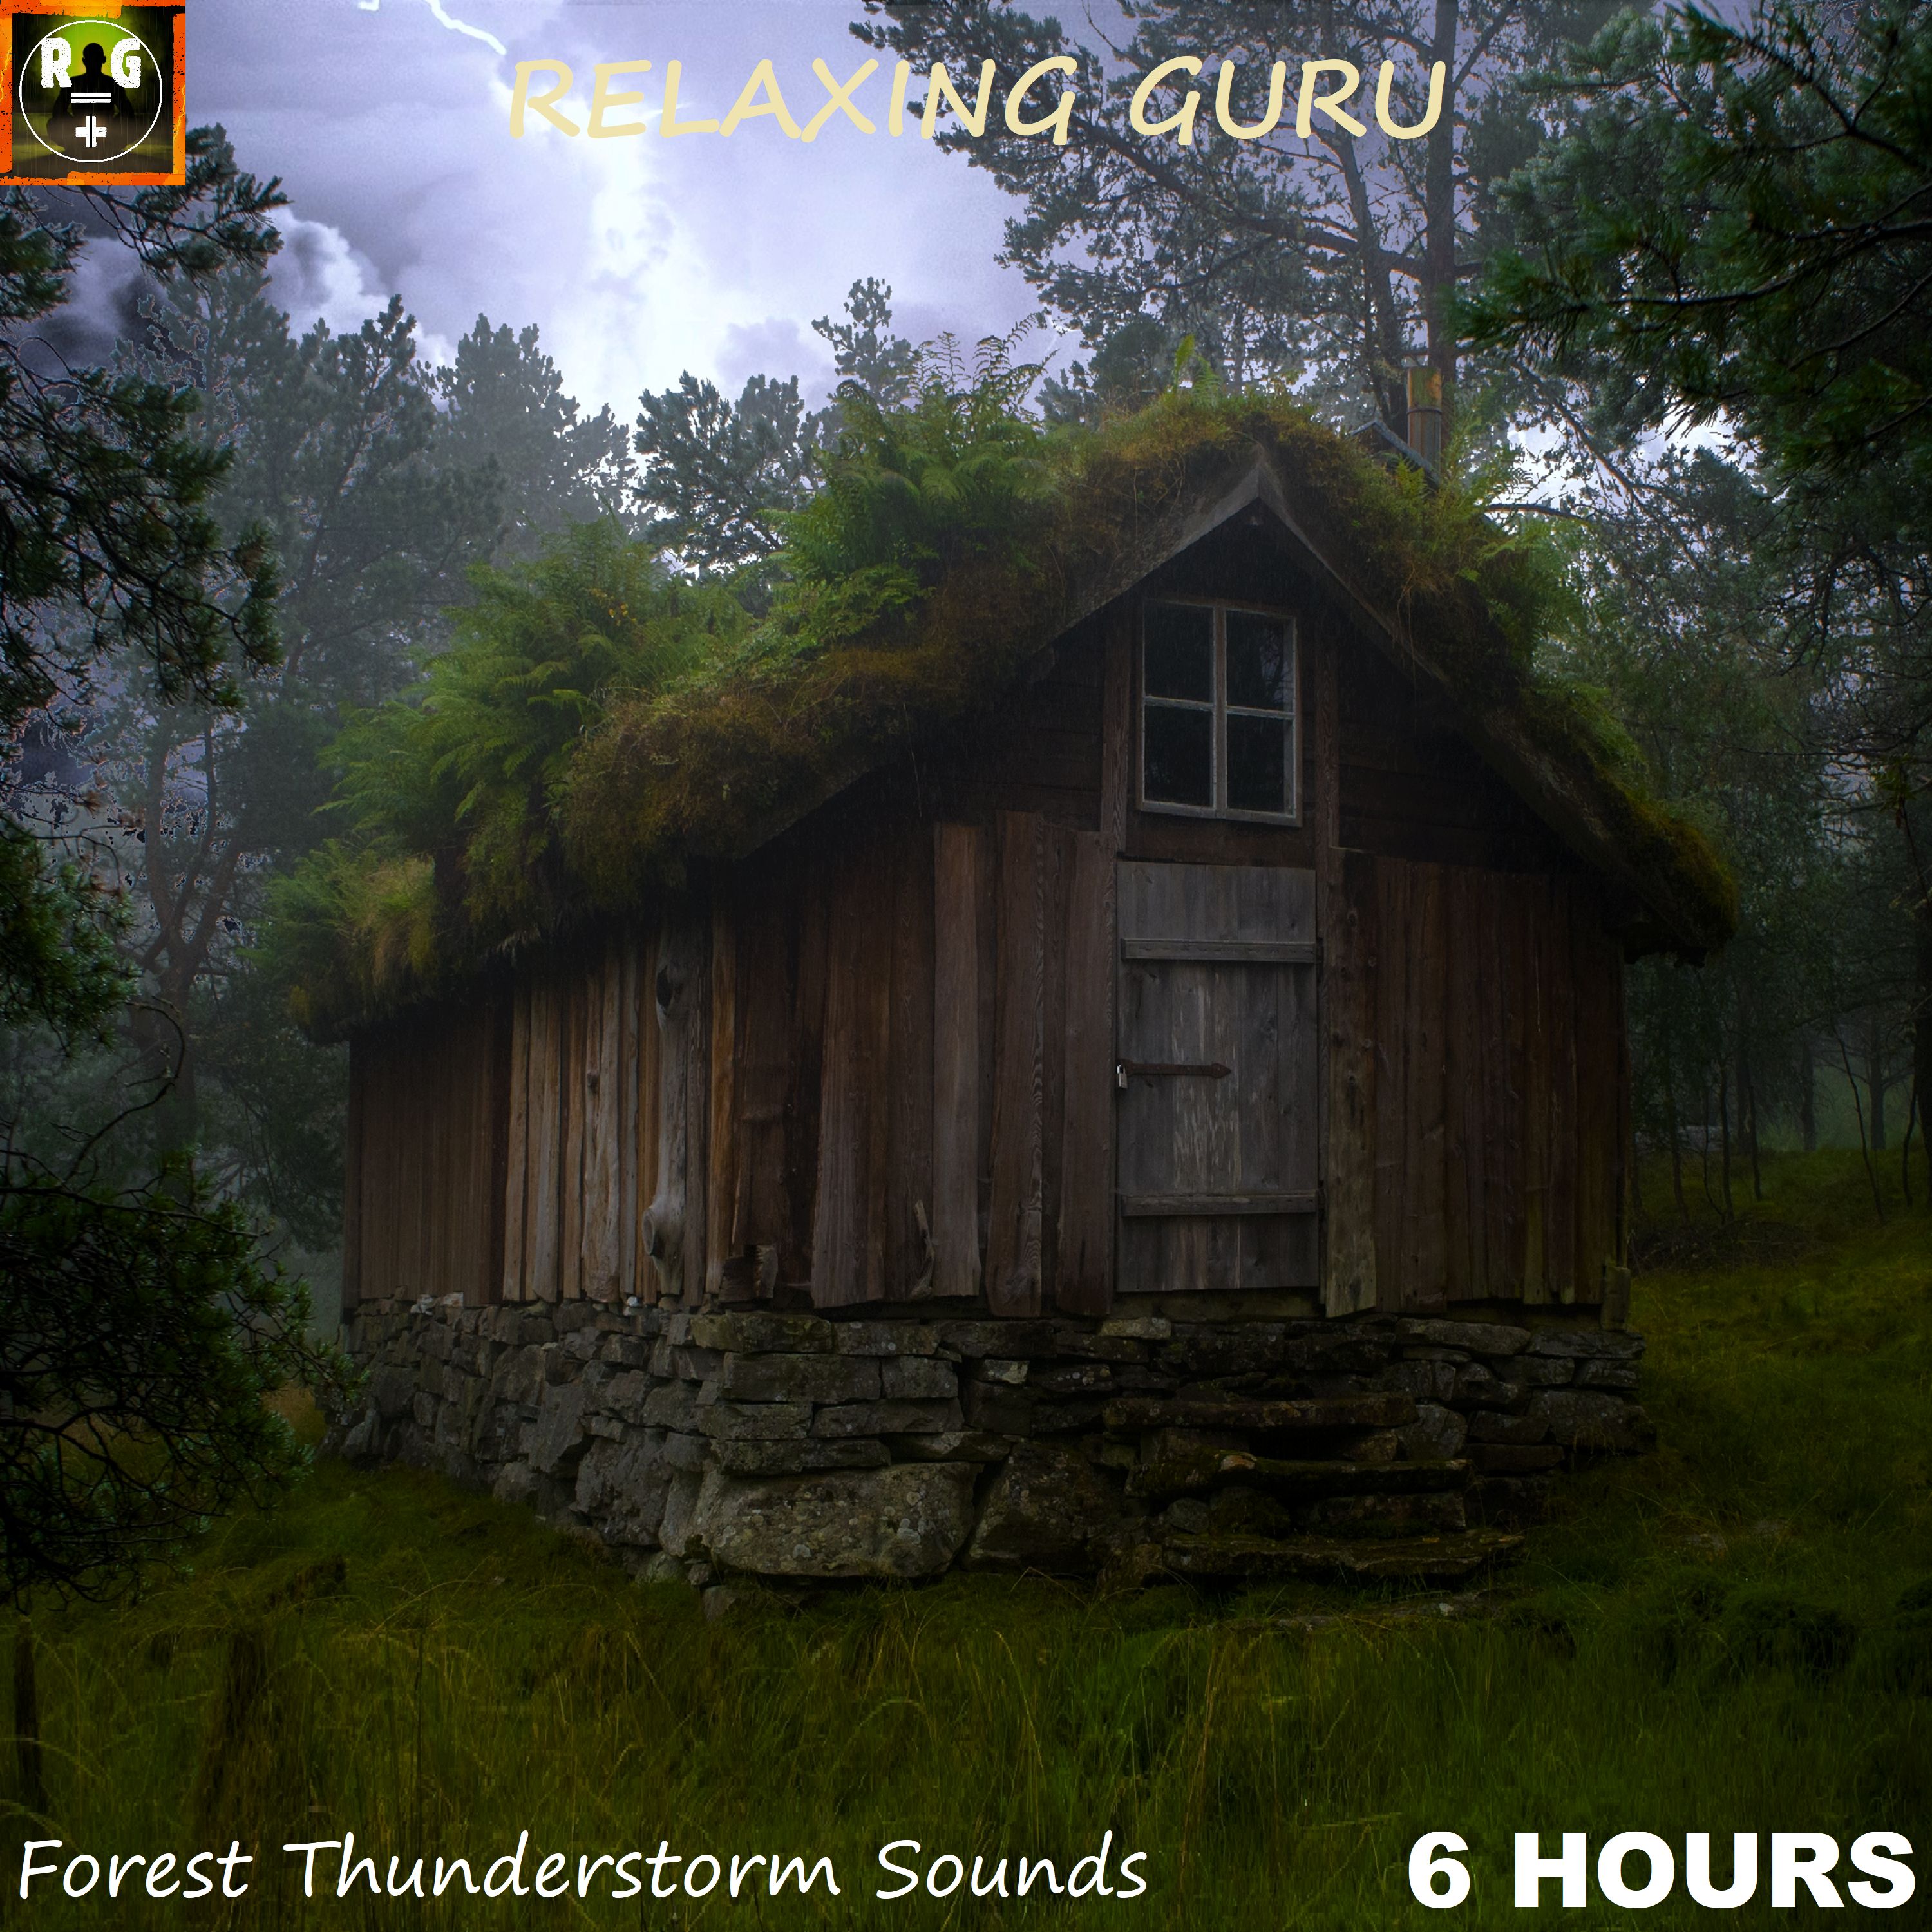 Skinuti Relaxing Rain & Thunder on a Wooden Hut deep in the Forest - Thunderstorm Sounds for Sleep (6 HOURS)